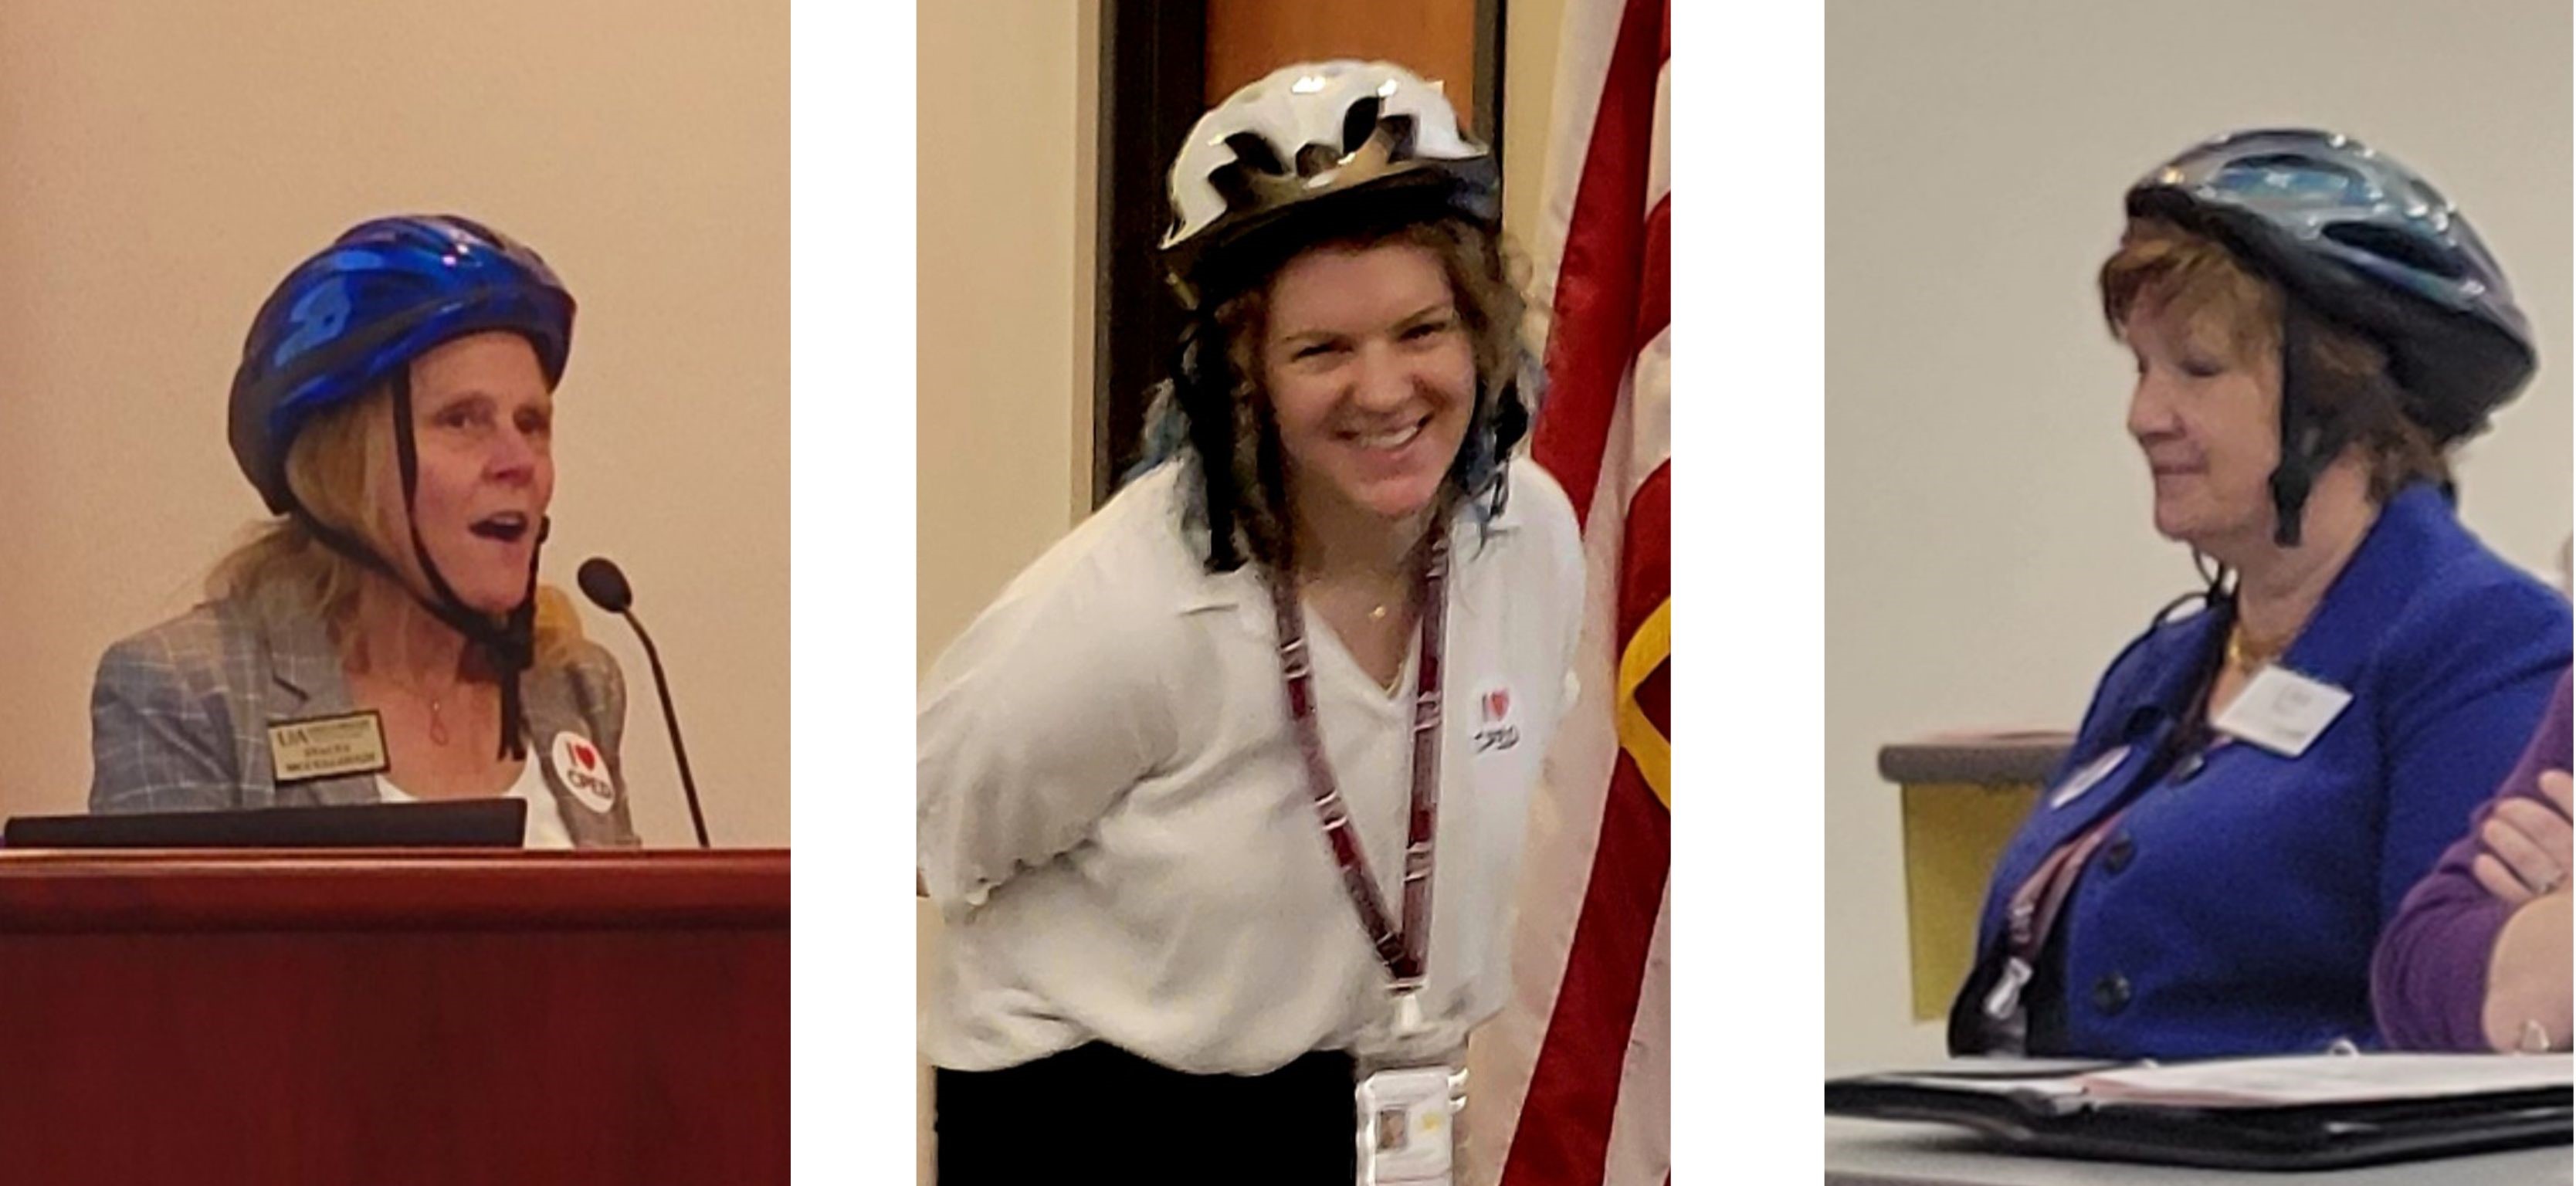 CPED employees wearing bicycle helmets